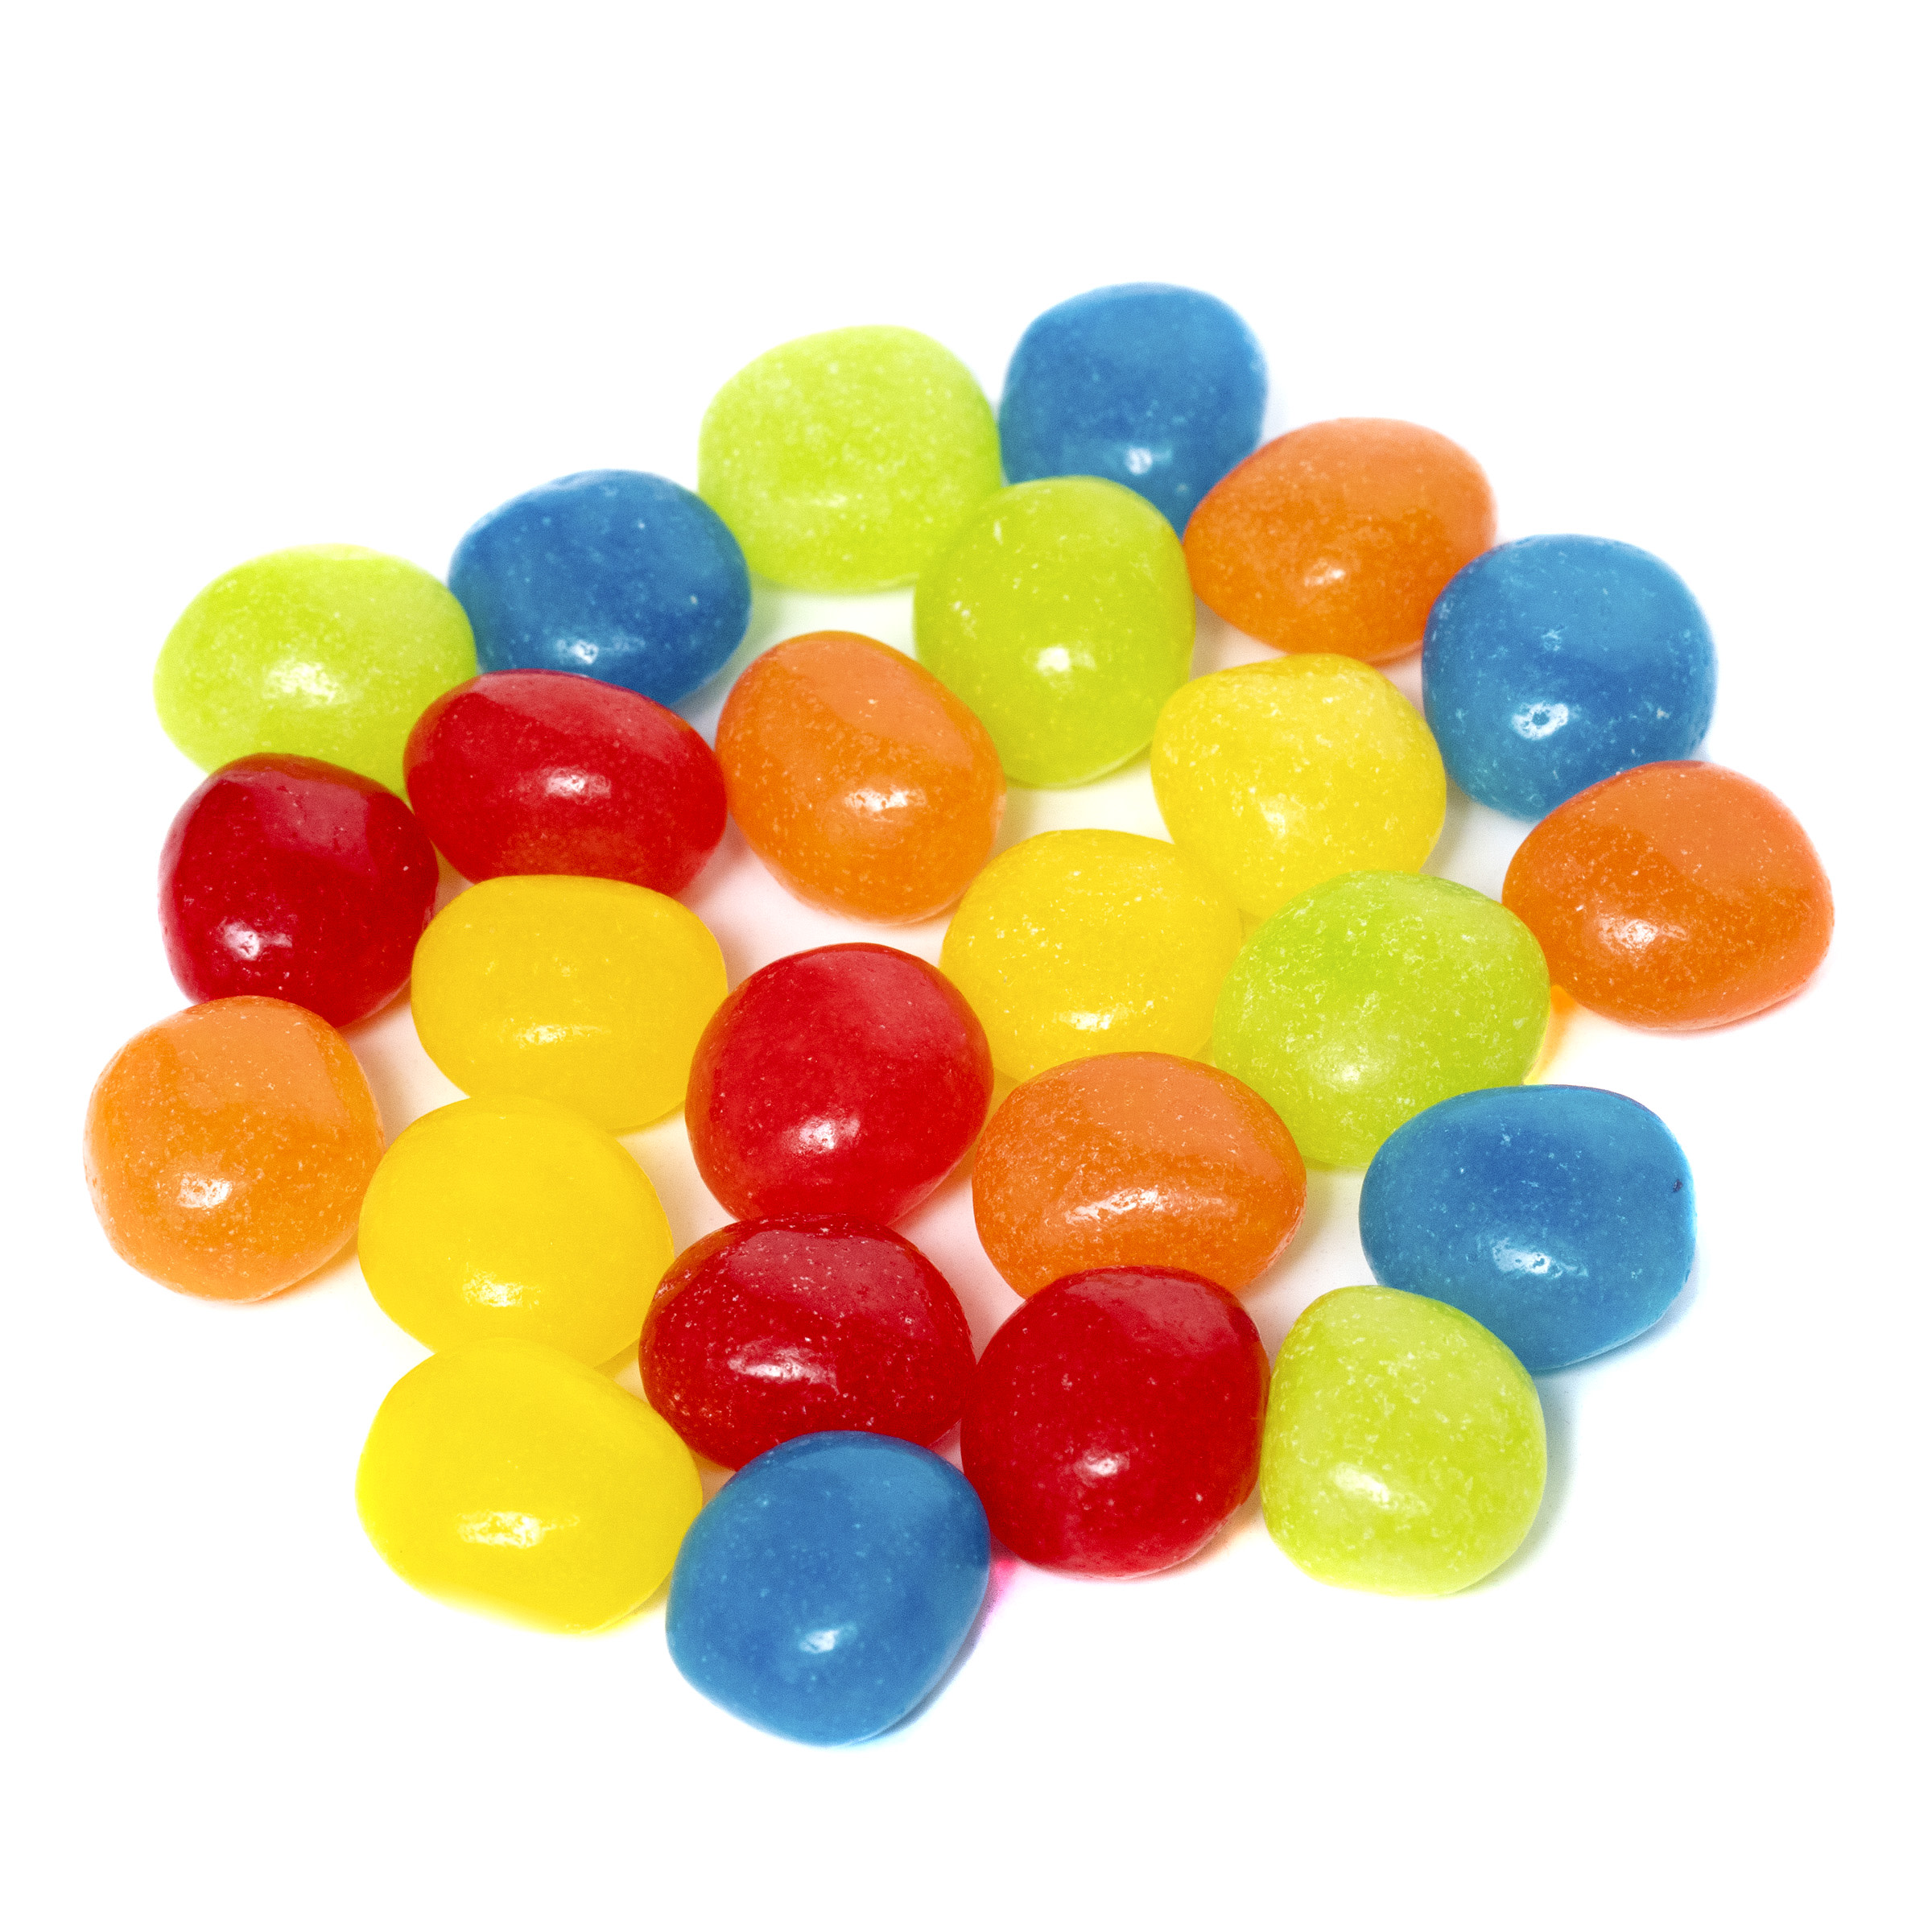 SOUR PATCH KIDS Jelly Beans, Easter Candy, 13 oz - image 3 of 12